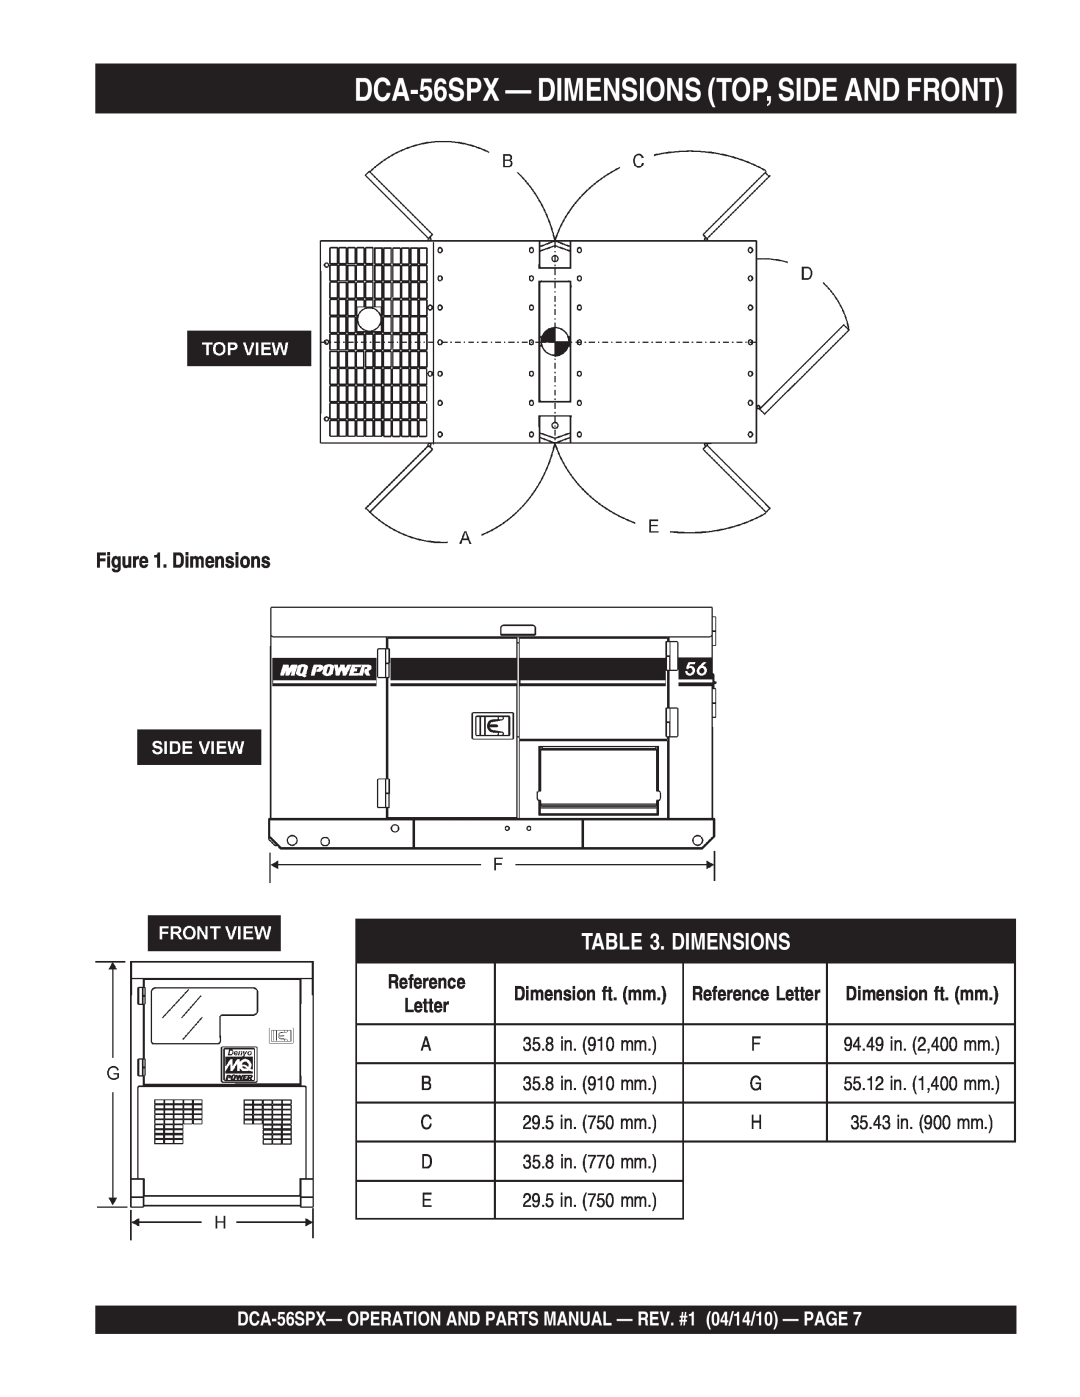 Multiquip operation manual DCA-56SPX- DIMENSIONS TOP, SIDE AND FRONT, Dimensions, Dimension ft. mm, Reference Letter 